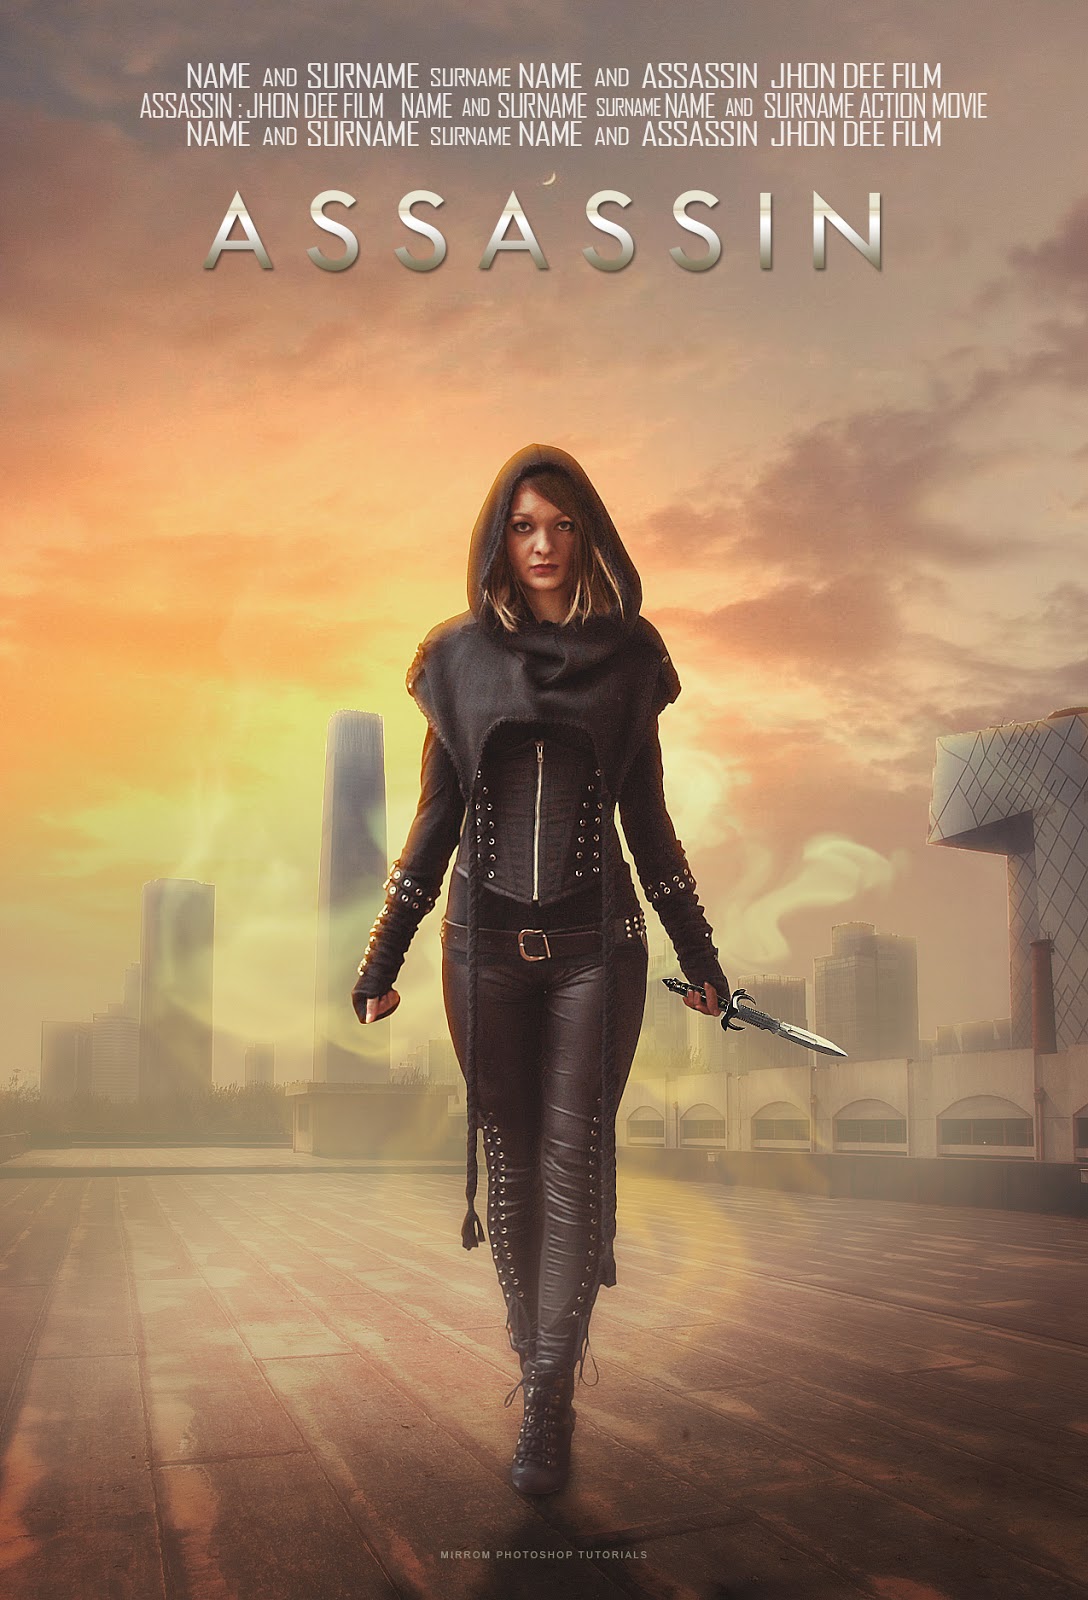 Create a Assassin Movie Poster Manipulation in Photoshop